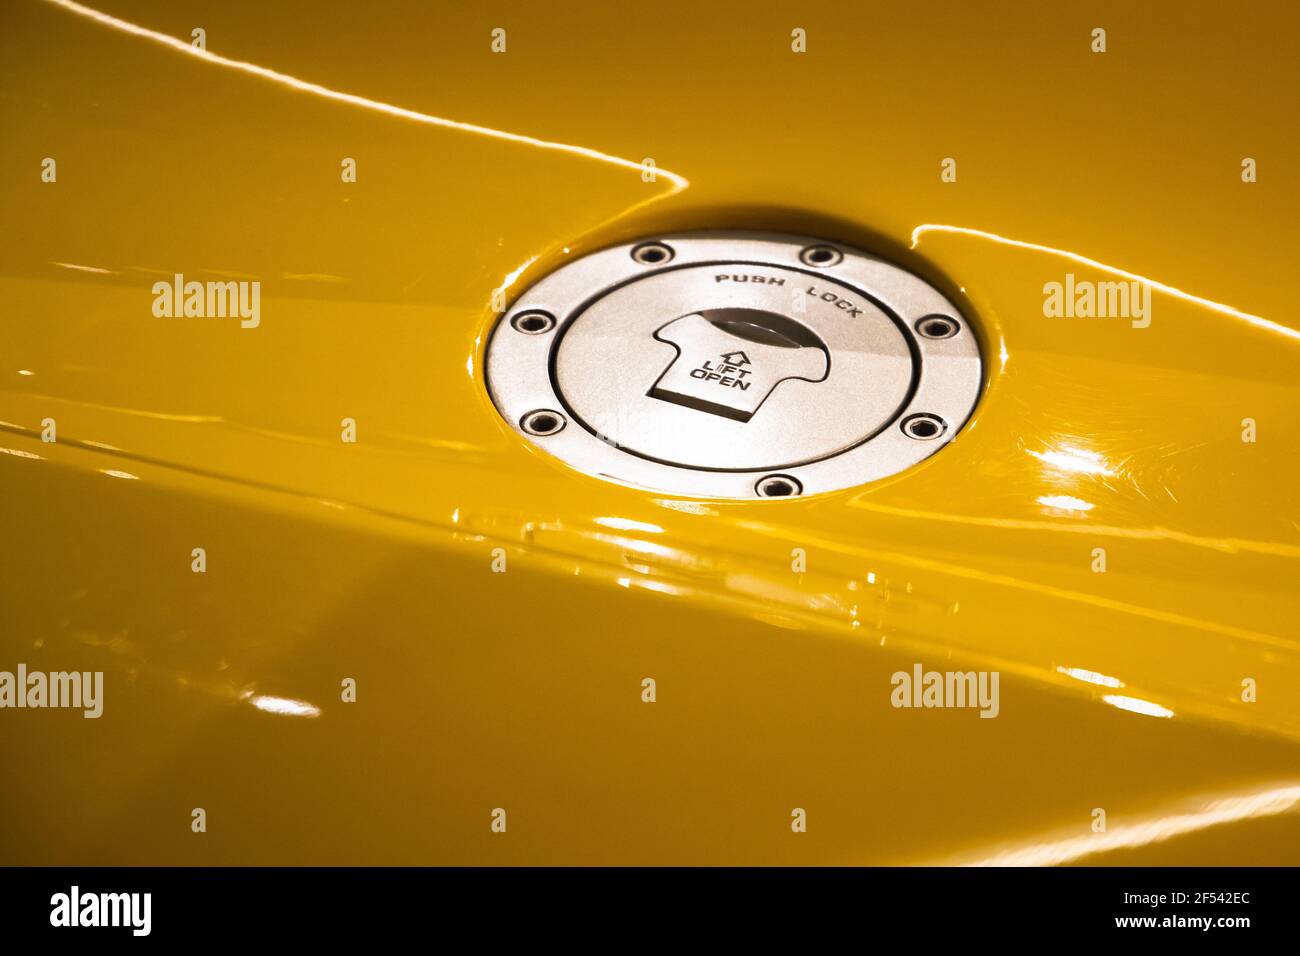 Yellow sports car fuel cap with push lock, close up photo. Abstract modern sports car design template Stock Photo